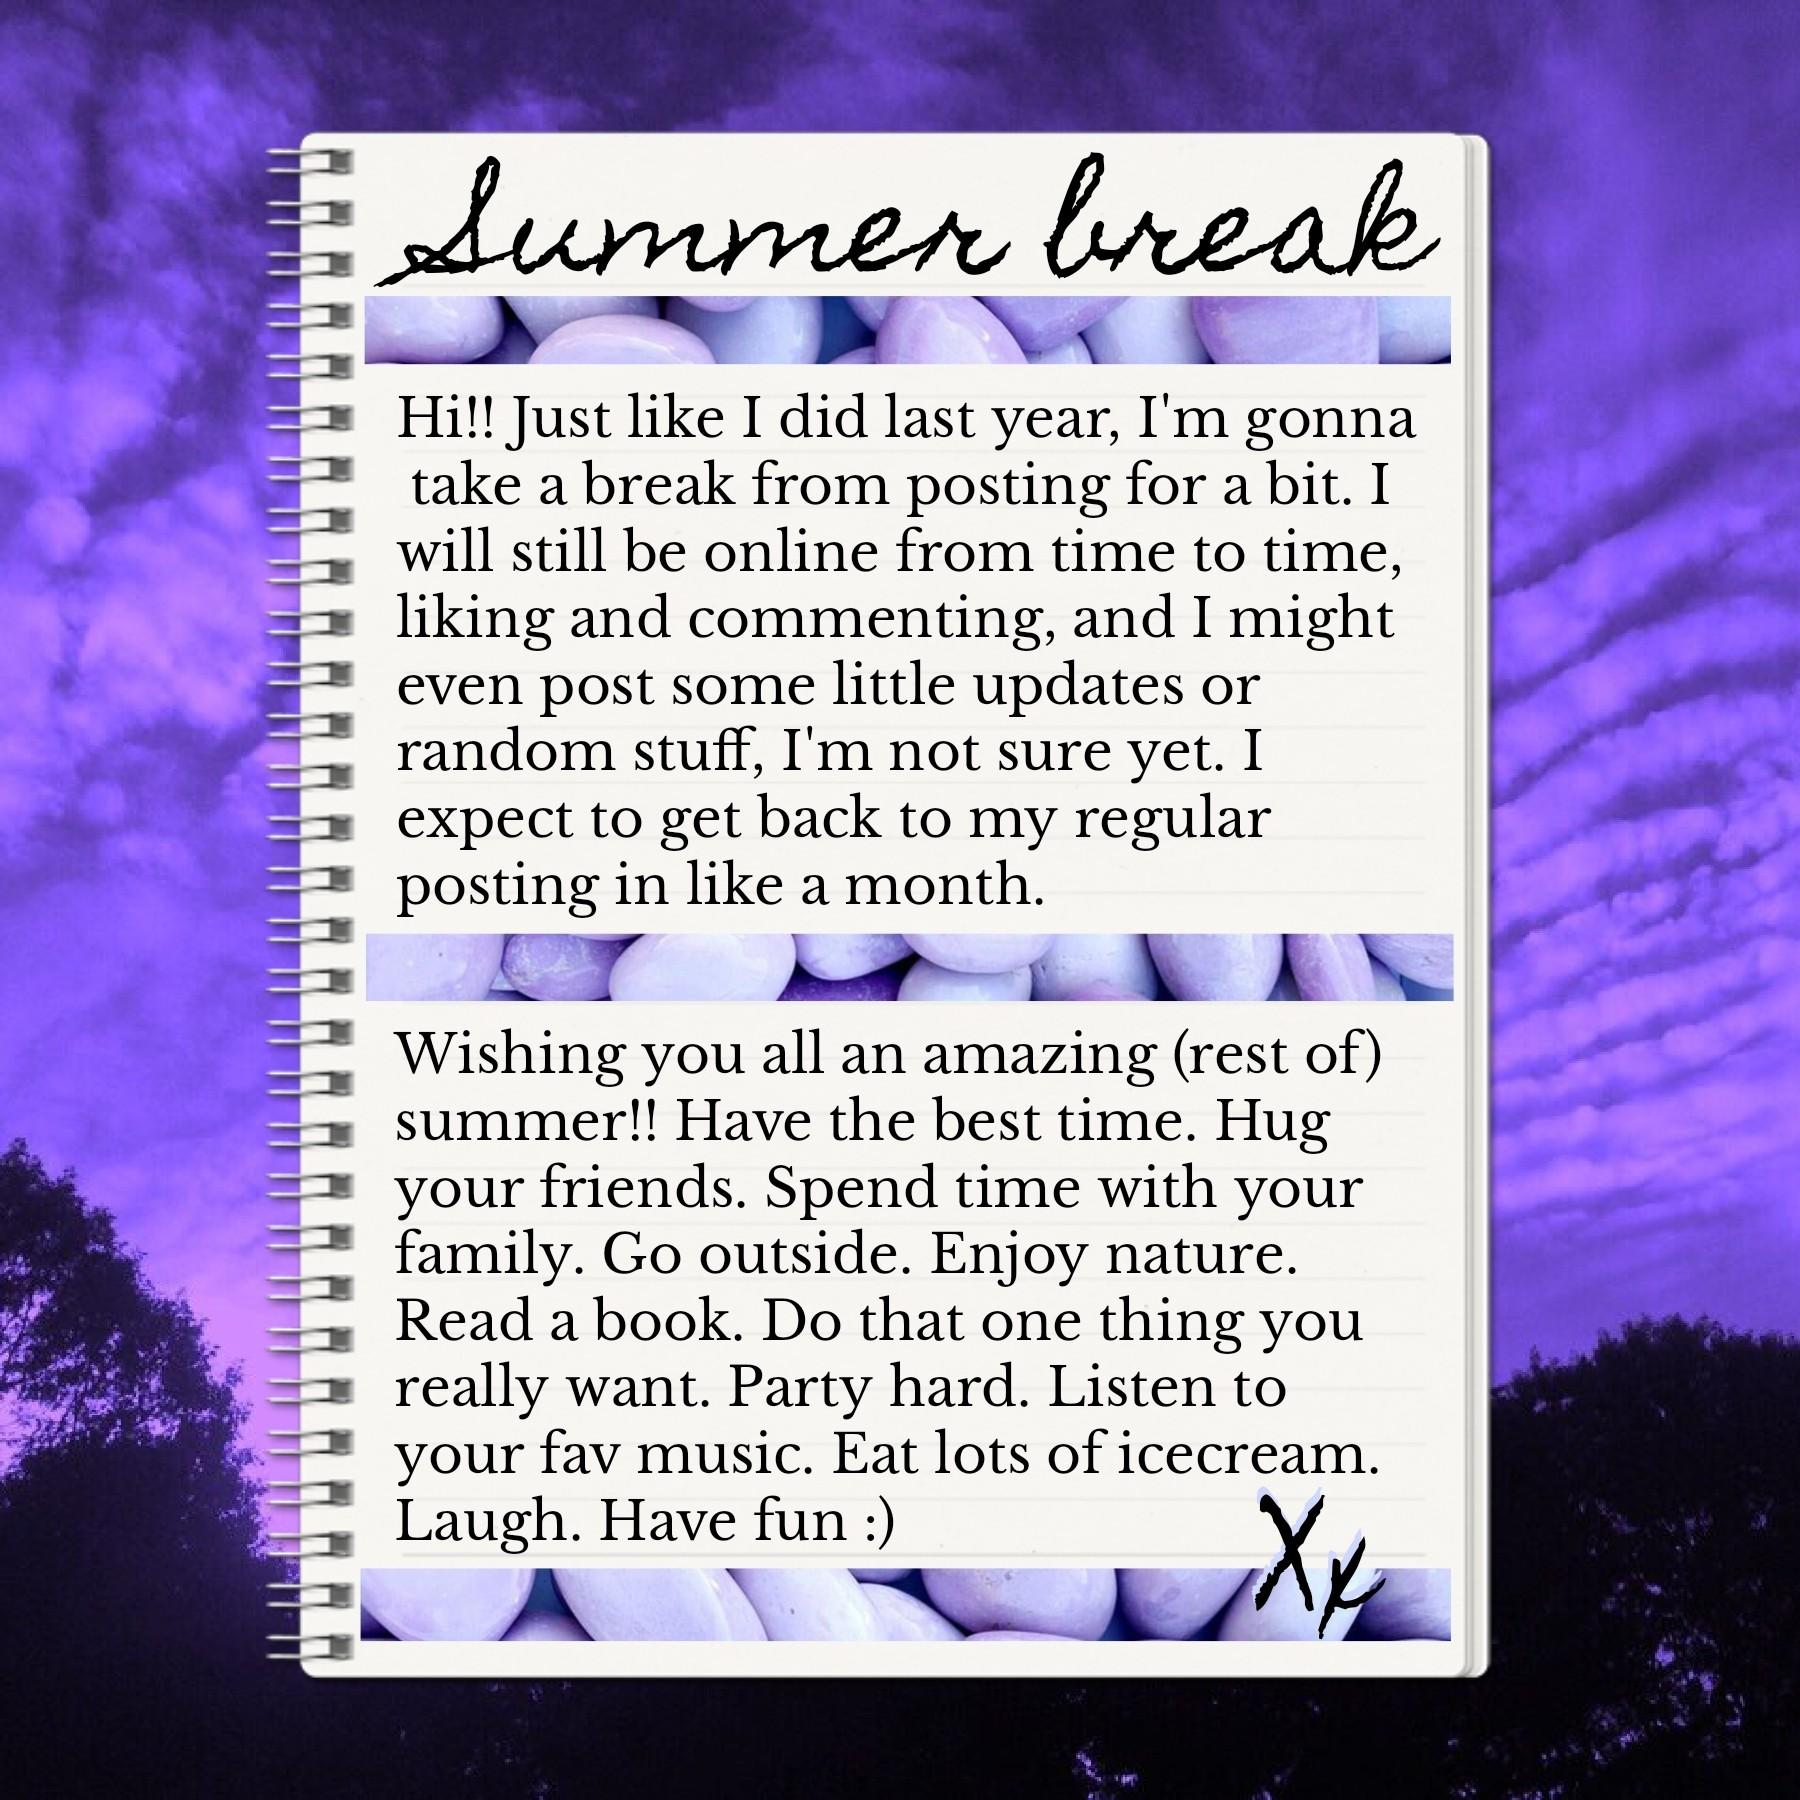 Don't forget to enjoy the summer while it's here 💜